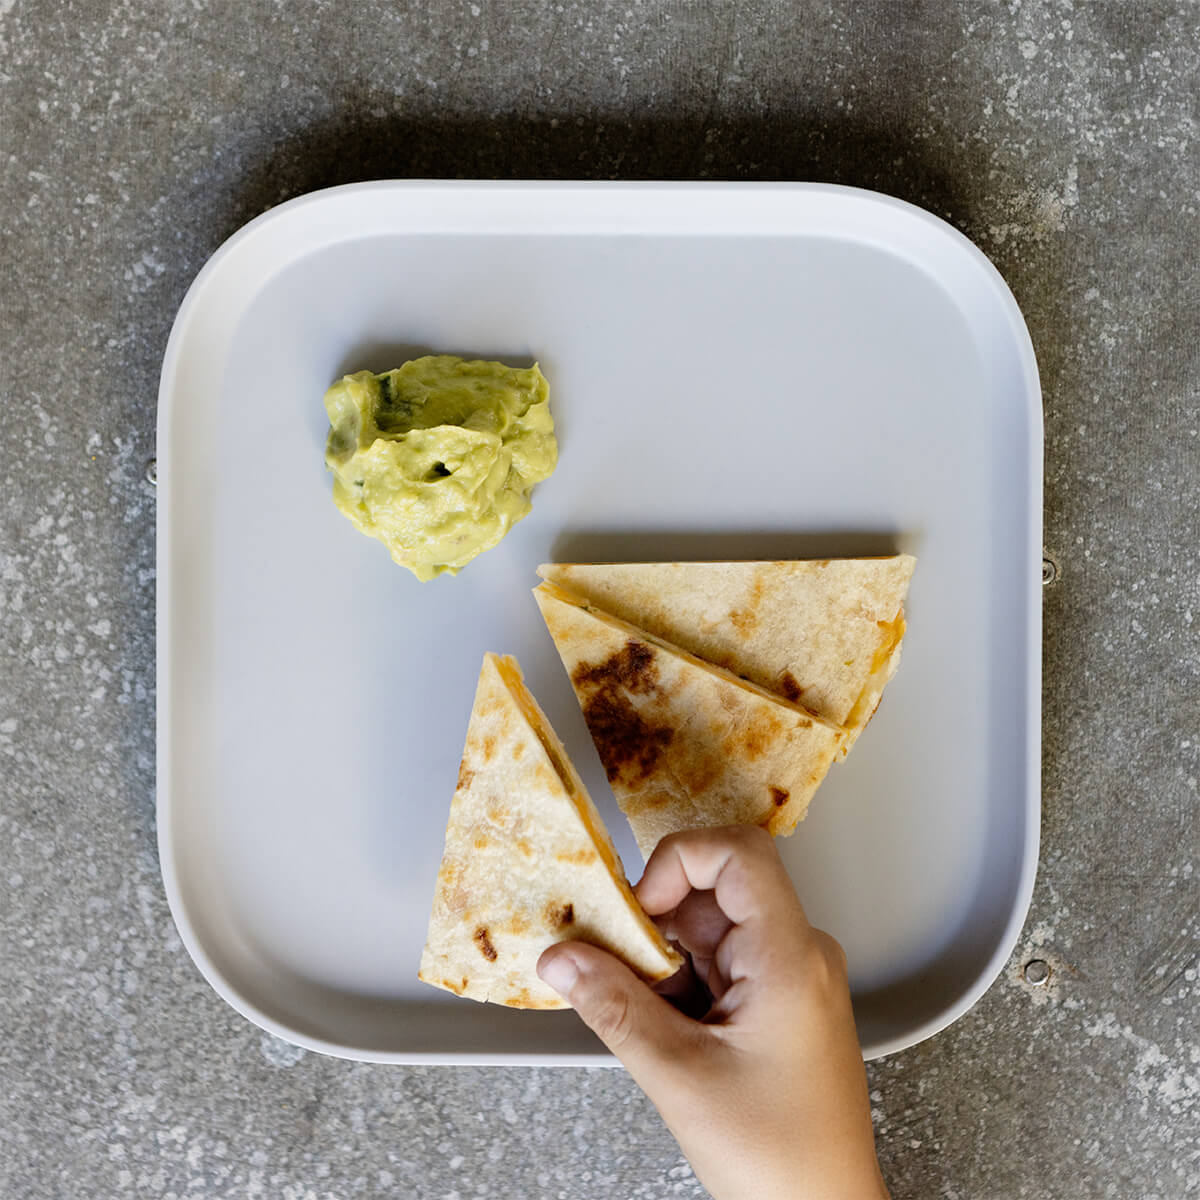 Mealtime Plate in Pewter / ezpz Basics Line / Stylish, Durable Plates for Big Kids